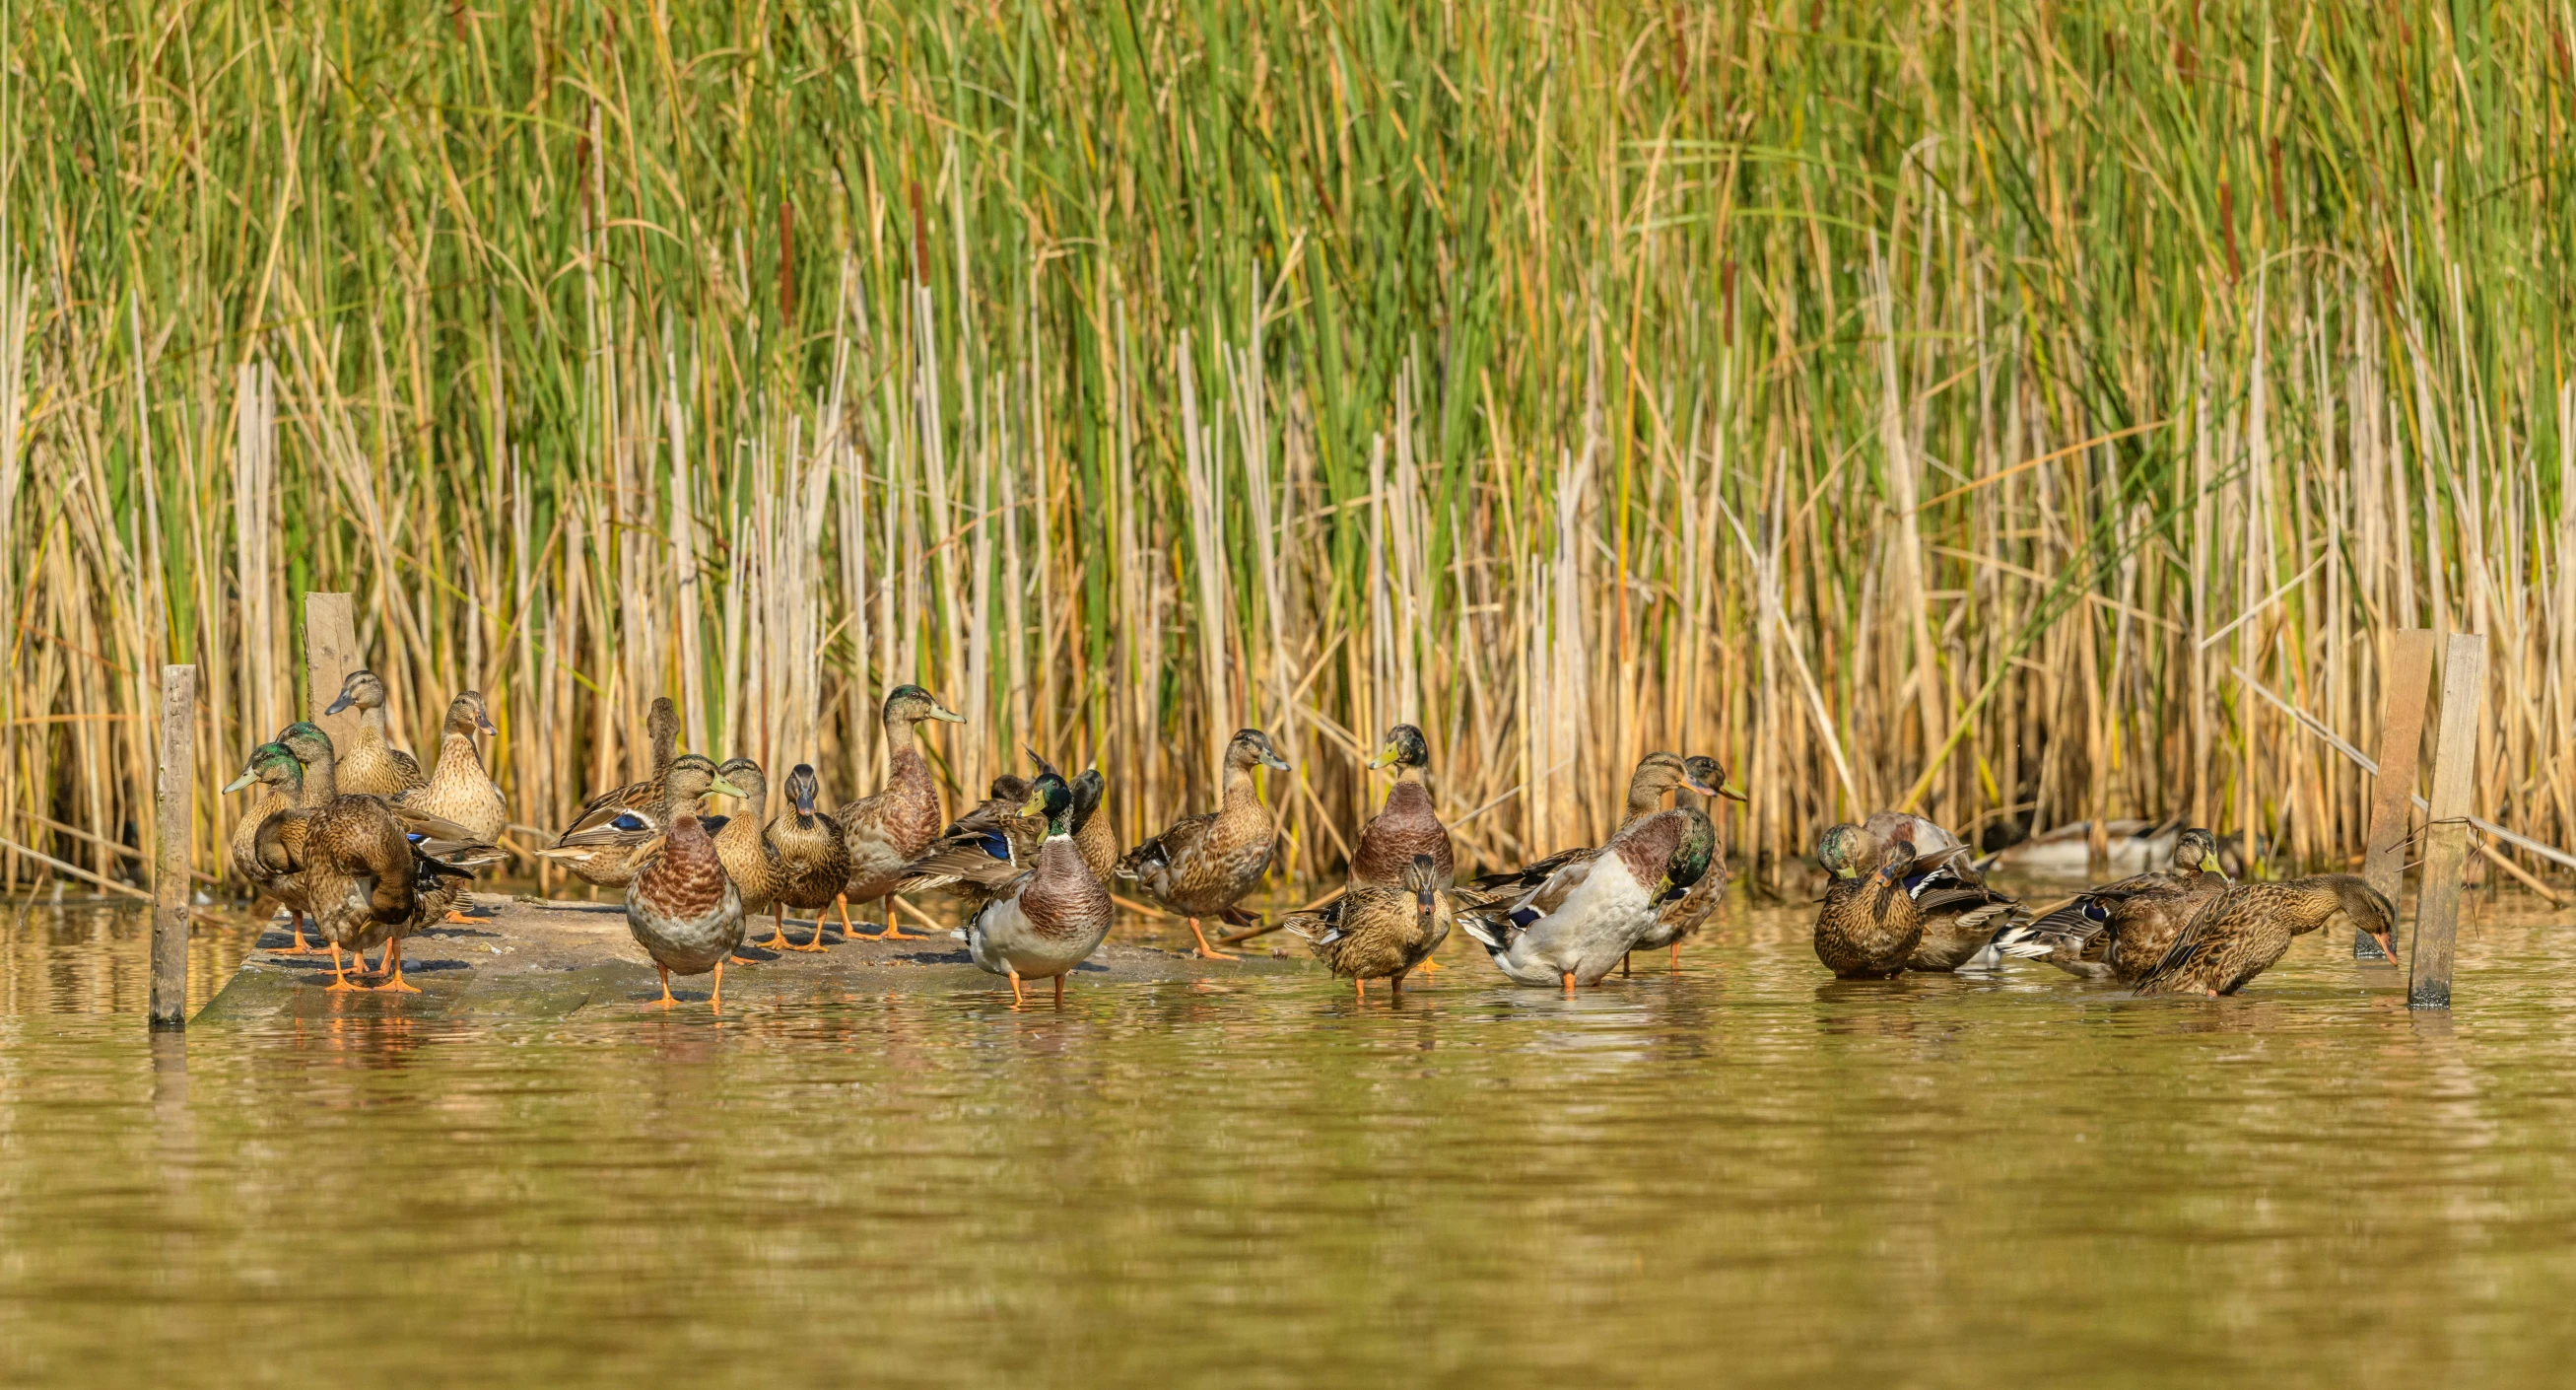 ducks are on the water and in the reeds